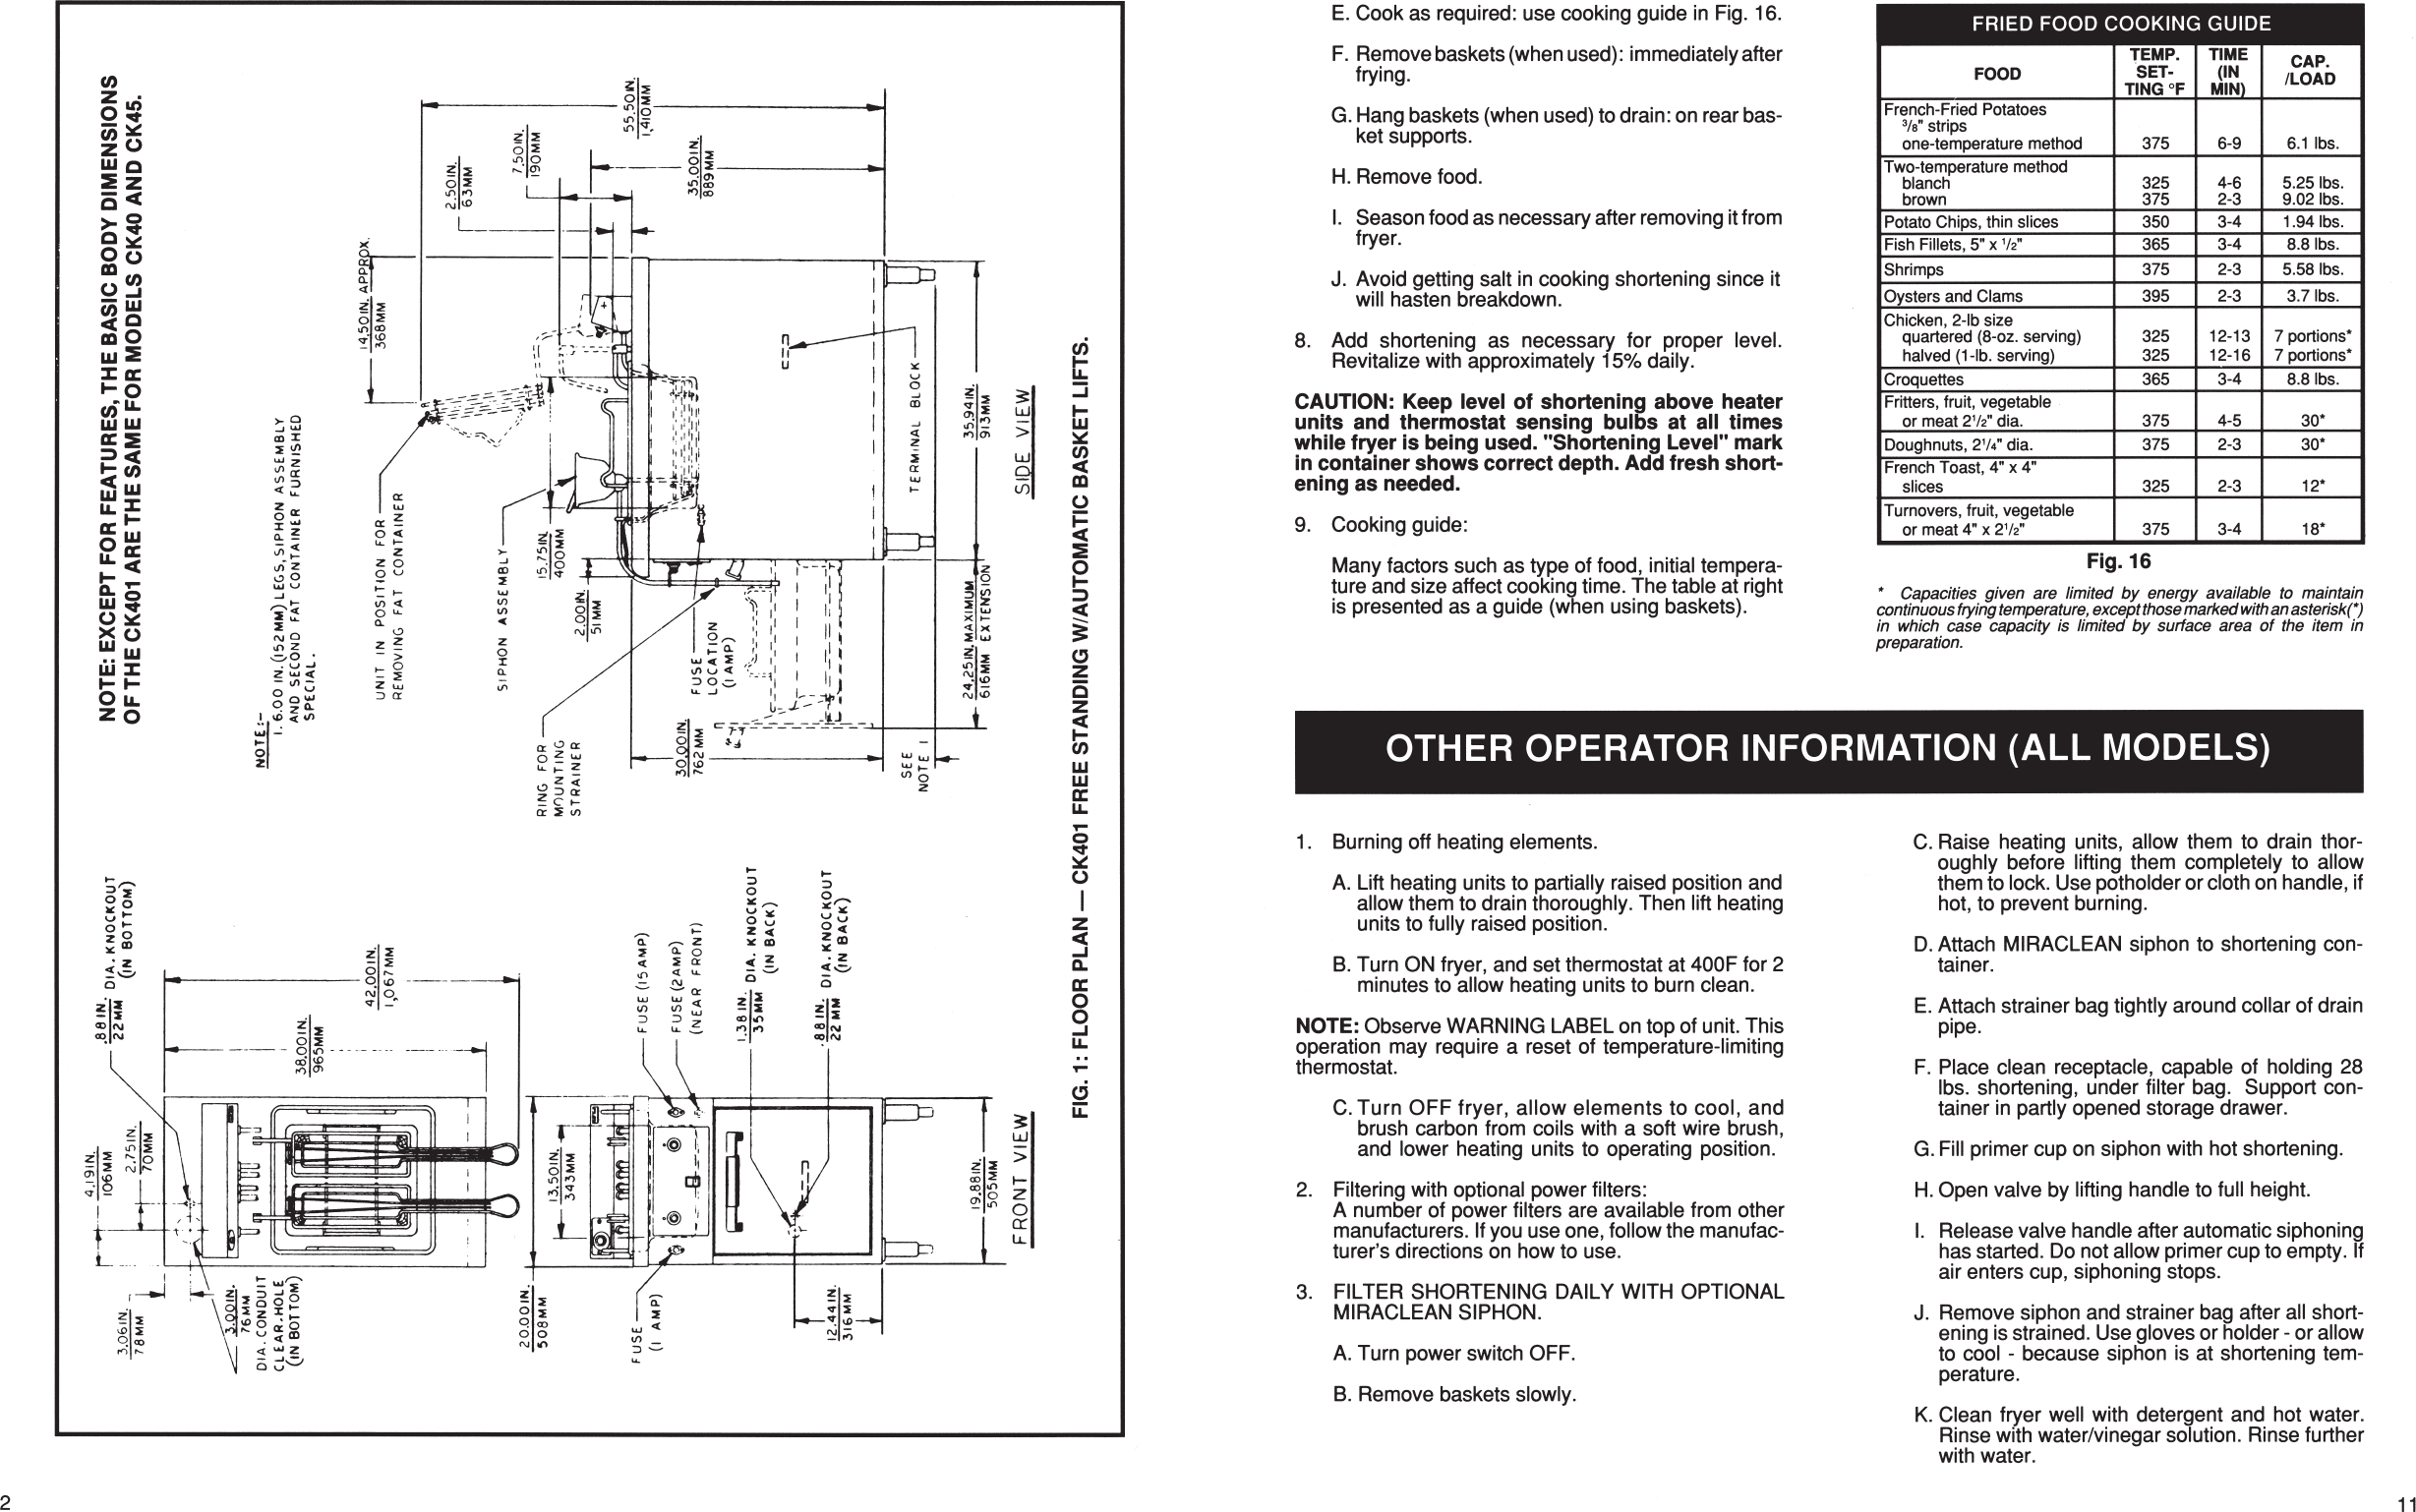 Page 2 of 12 - Hobart Hobart-Corp-Fryer-Ck40-Users-Manual- F27400  Hobart-corp-fryer-ck40-users-manual